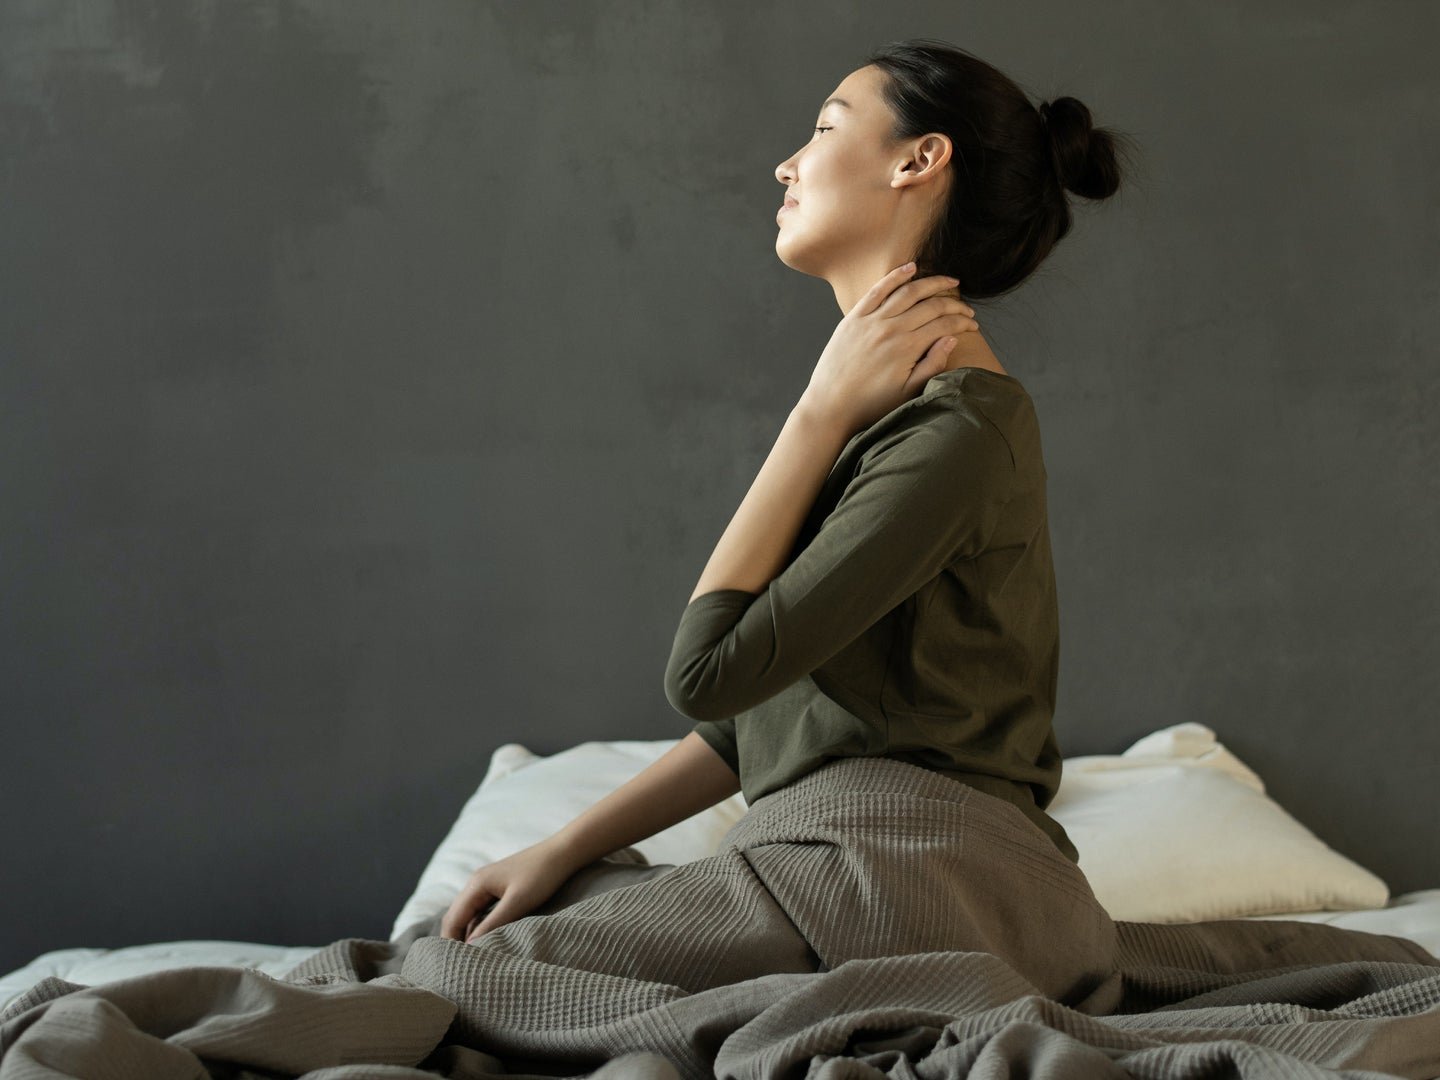 The best sleep position for minimizing aches and pains